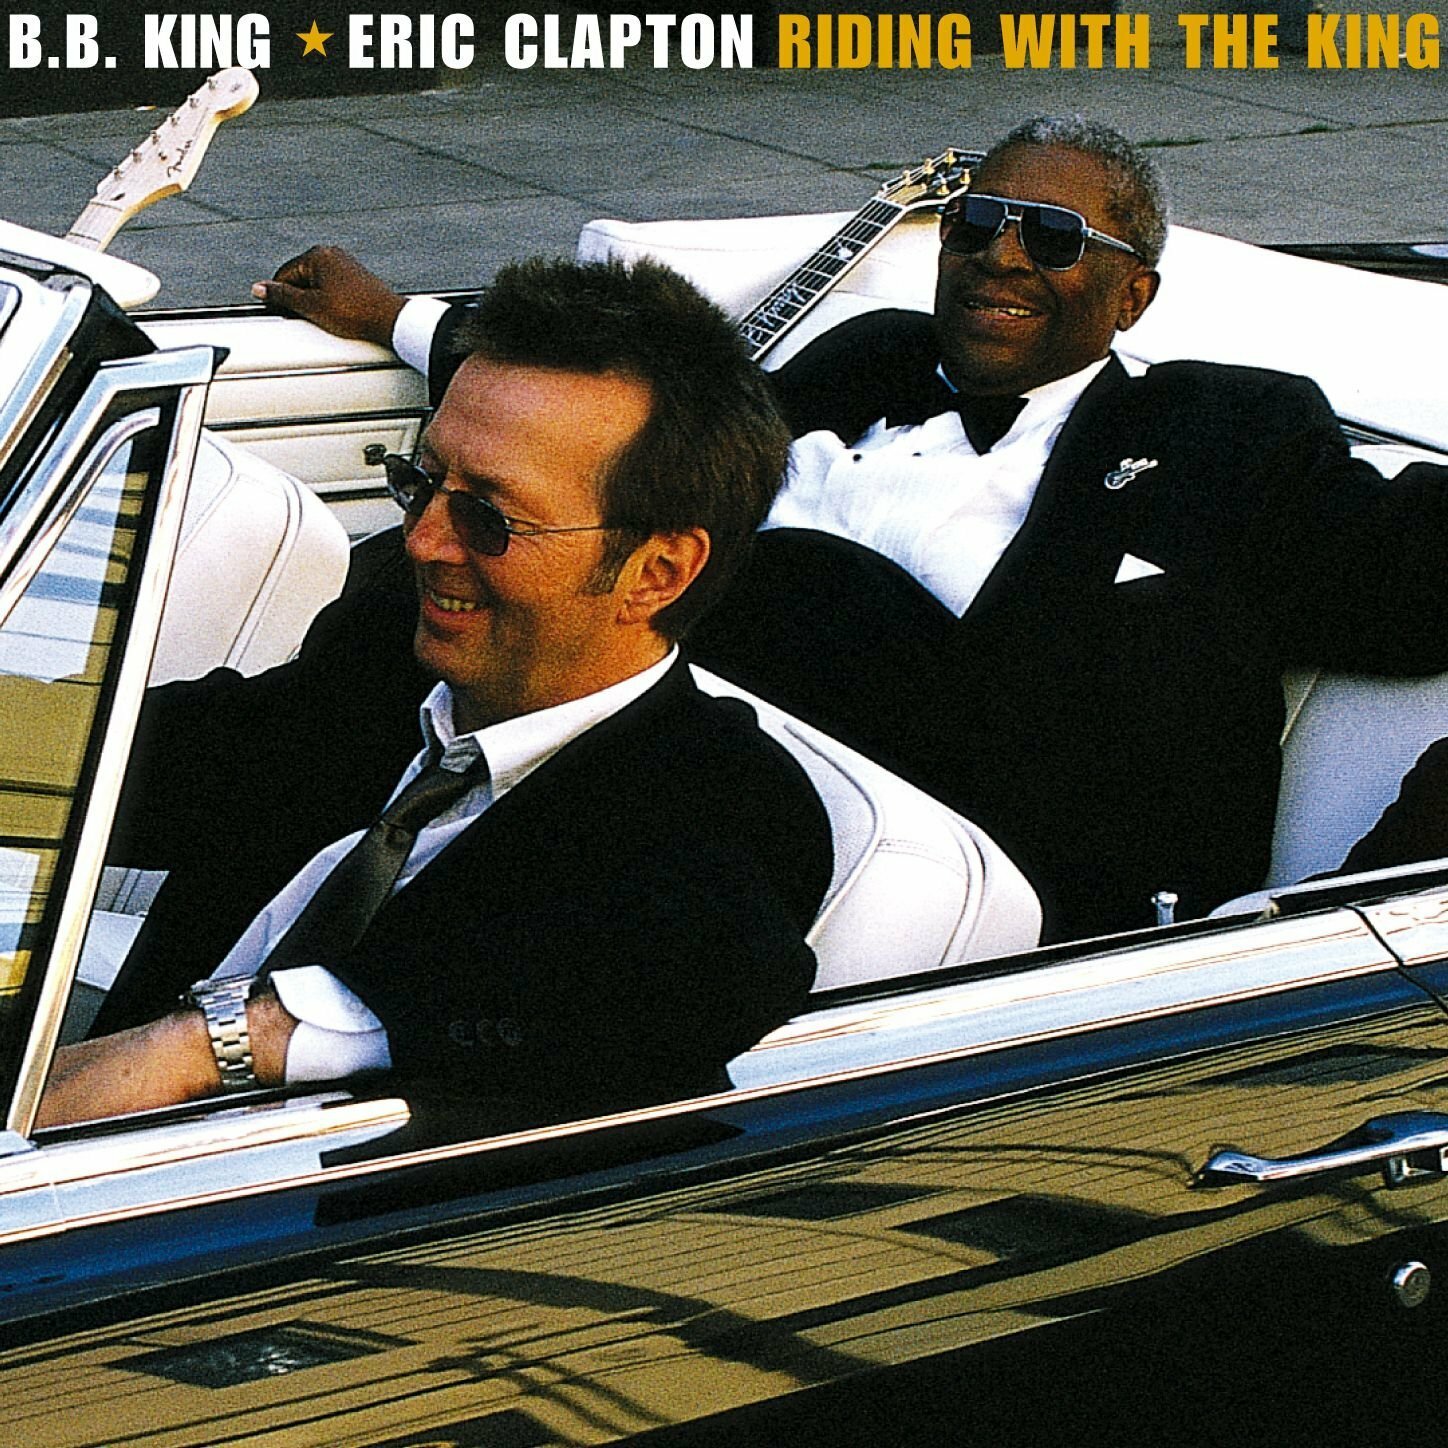 CD - BB King and Eric Clapton - Riding with the King